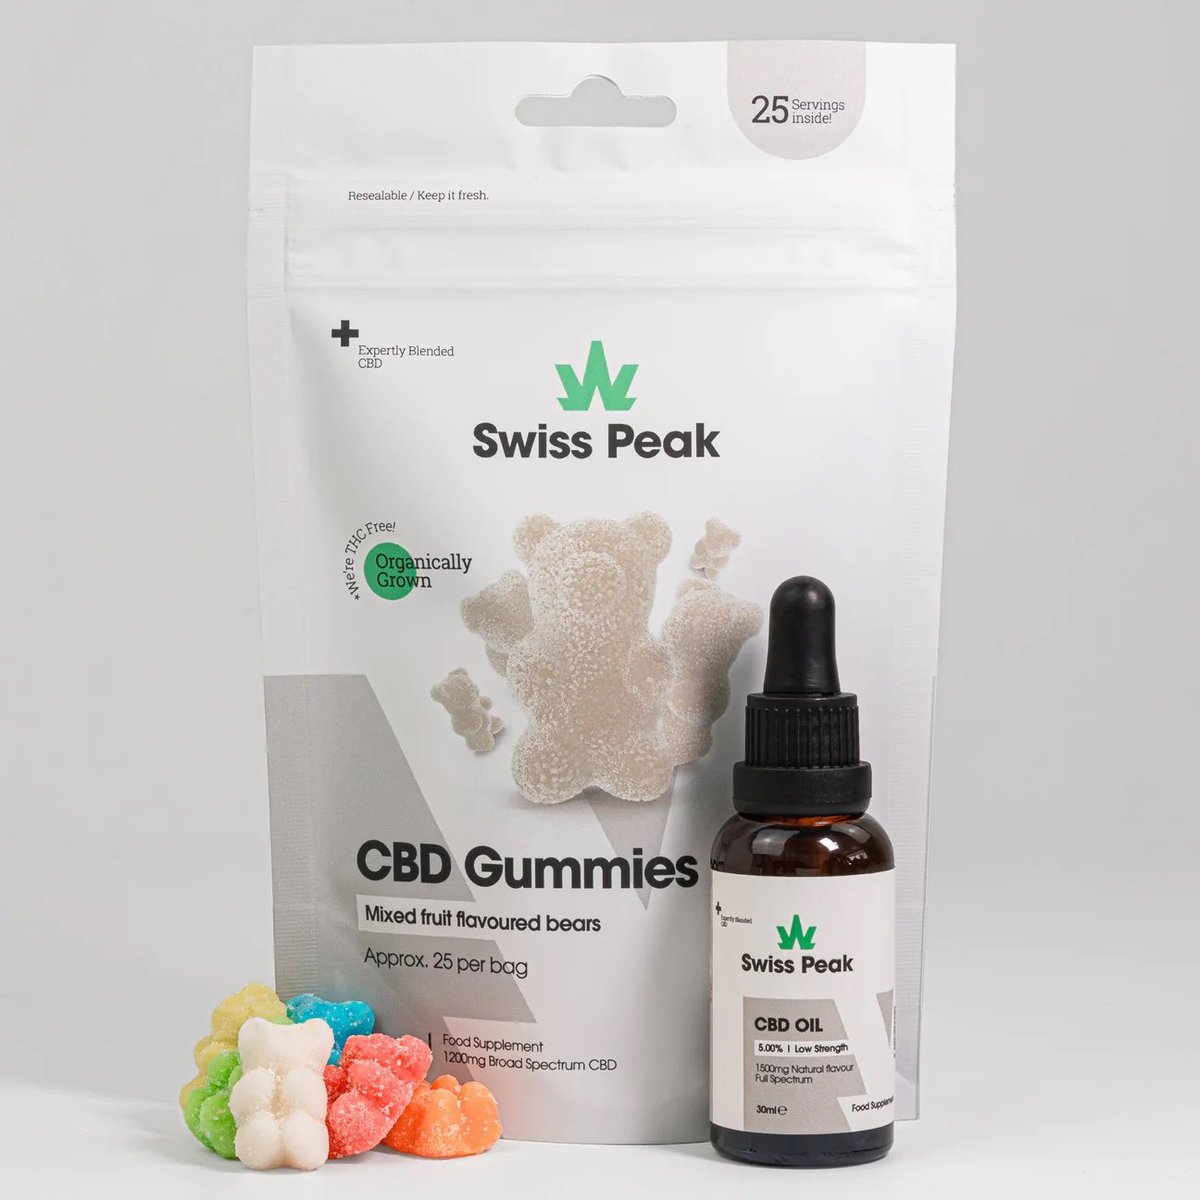 Sink into serenity this week and let our premium, all-natural CBD oil and gummies transport you to a world of ultimate relaxation. 🌿✨

#cbd #cbdoil #relaxation #allnatural #organiccbd #wellness #FolloMe